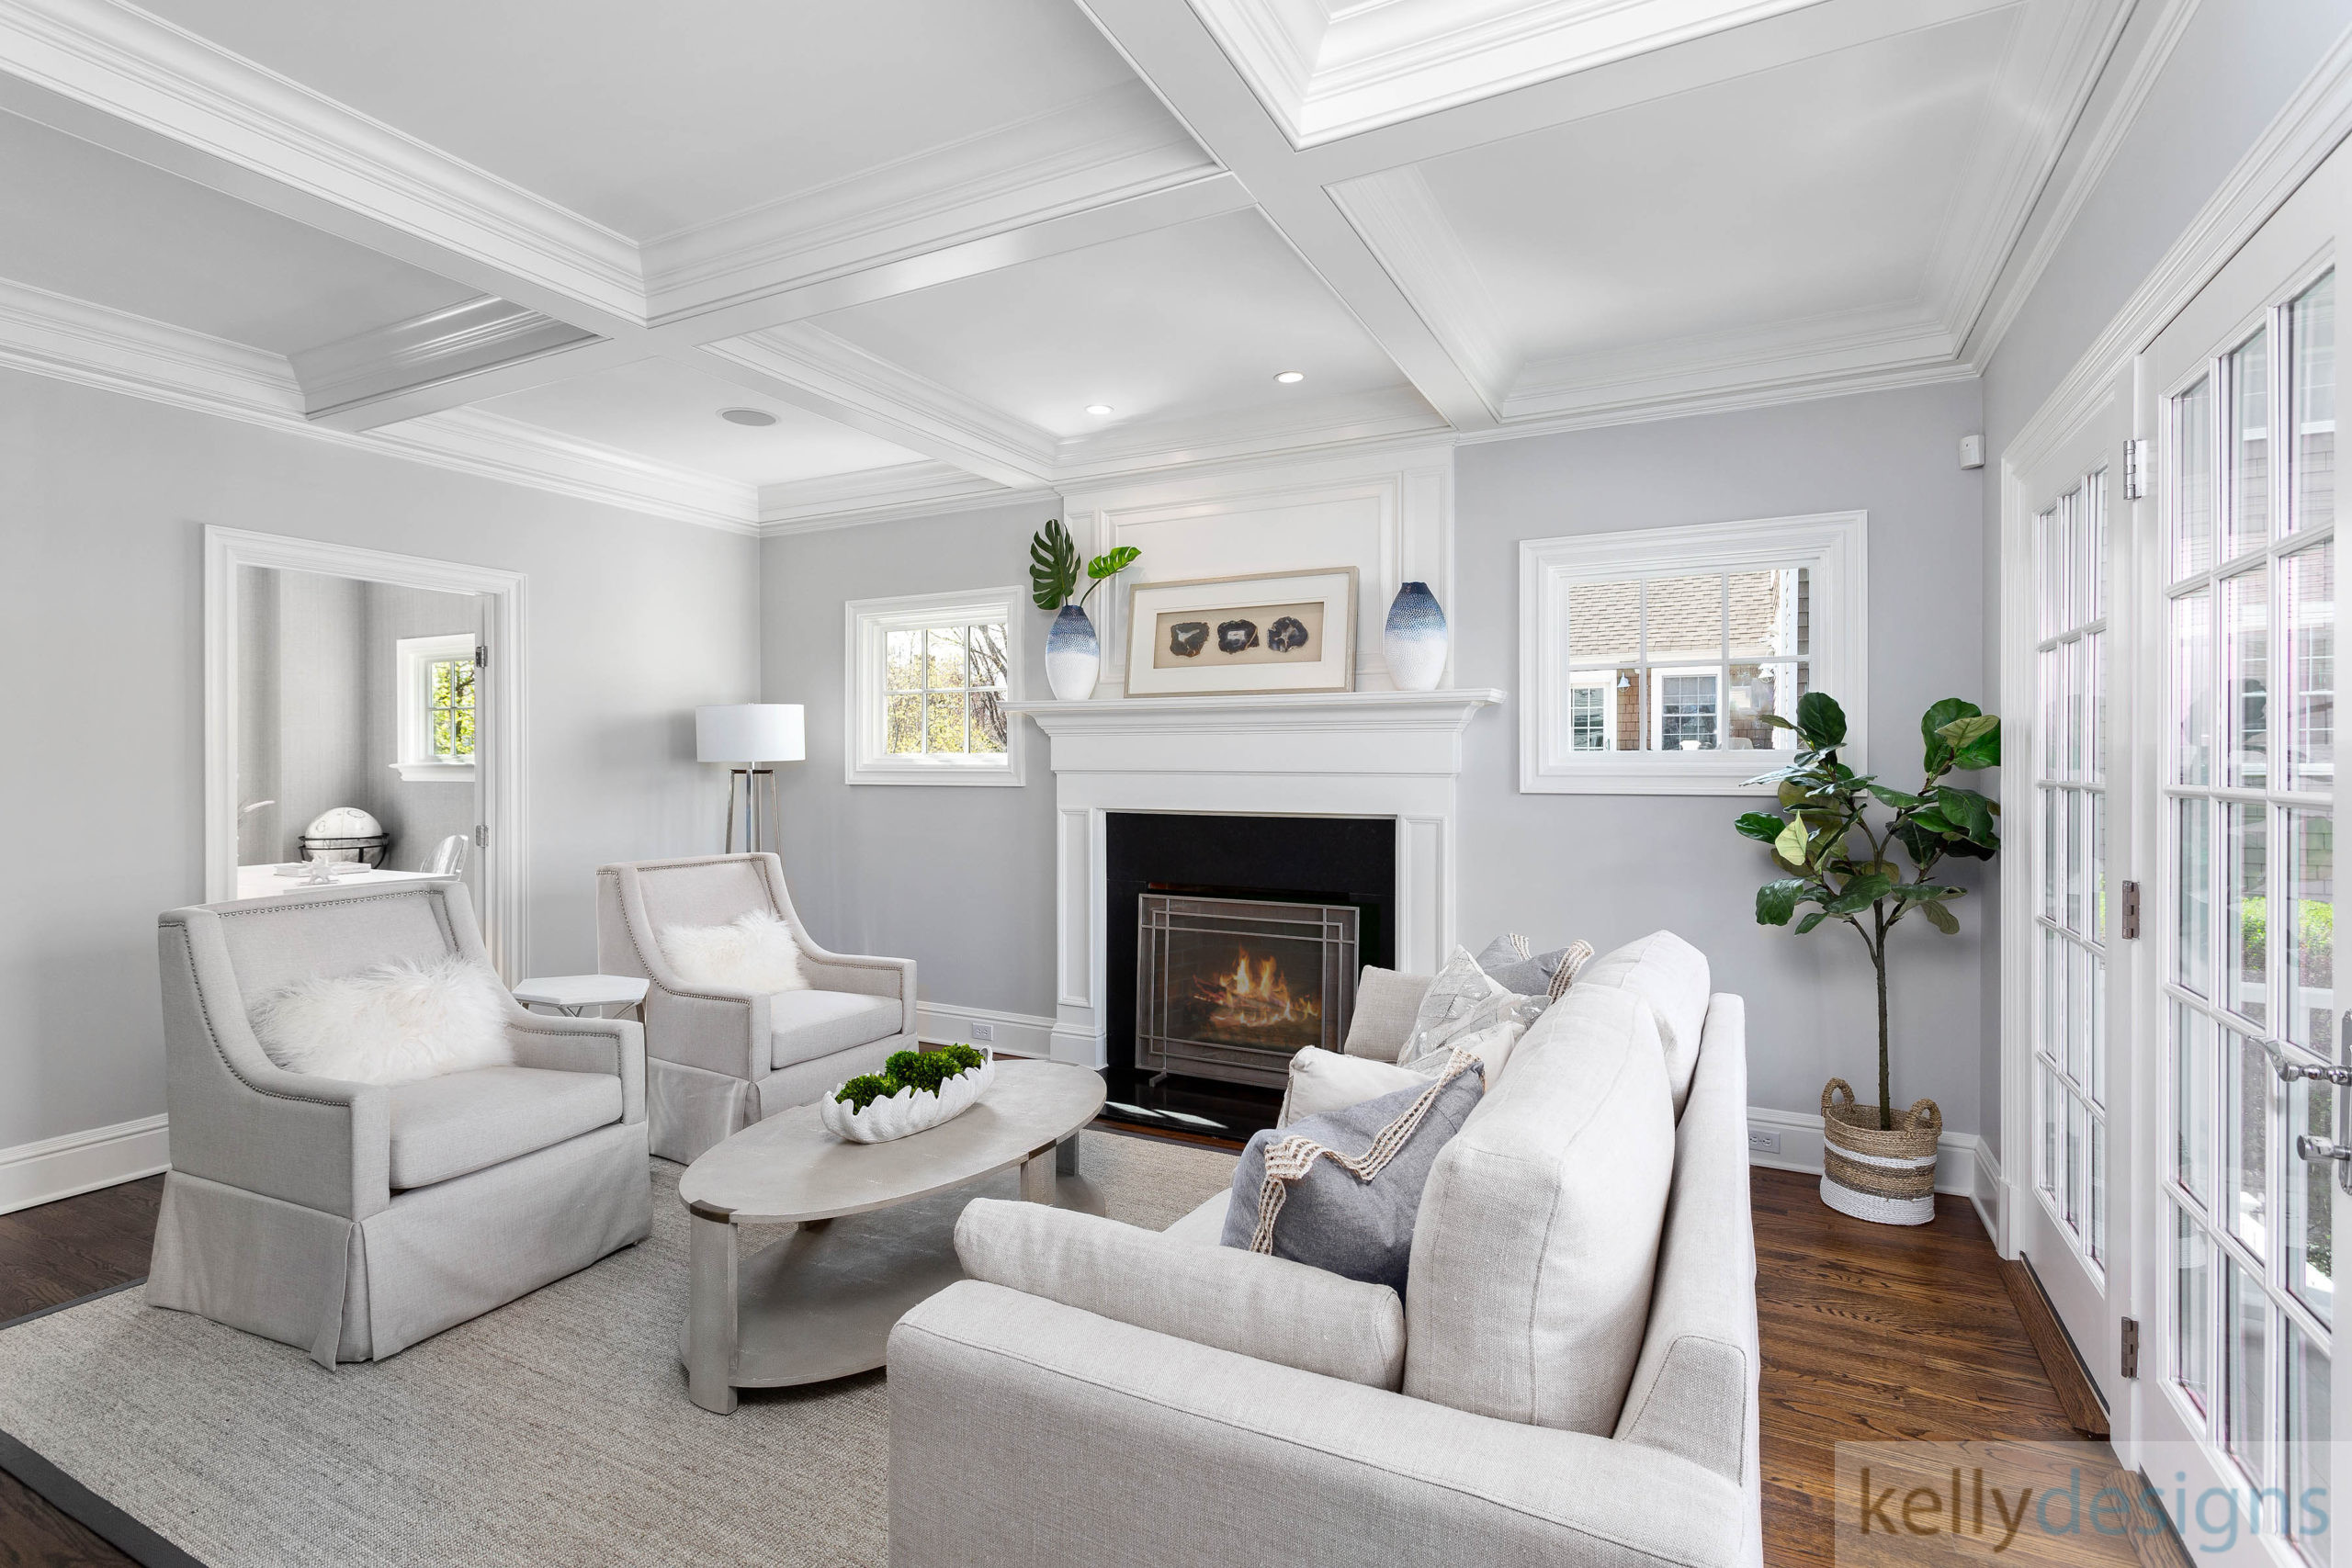 Pretty on Penfield - Home Staging by kellydeisgns